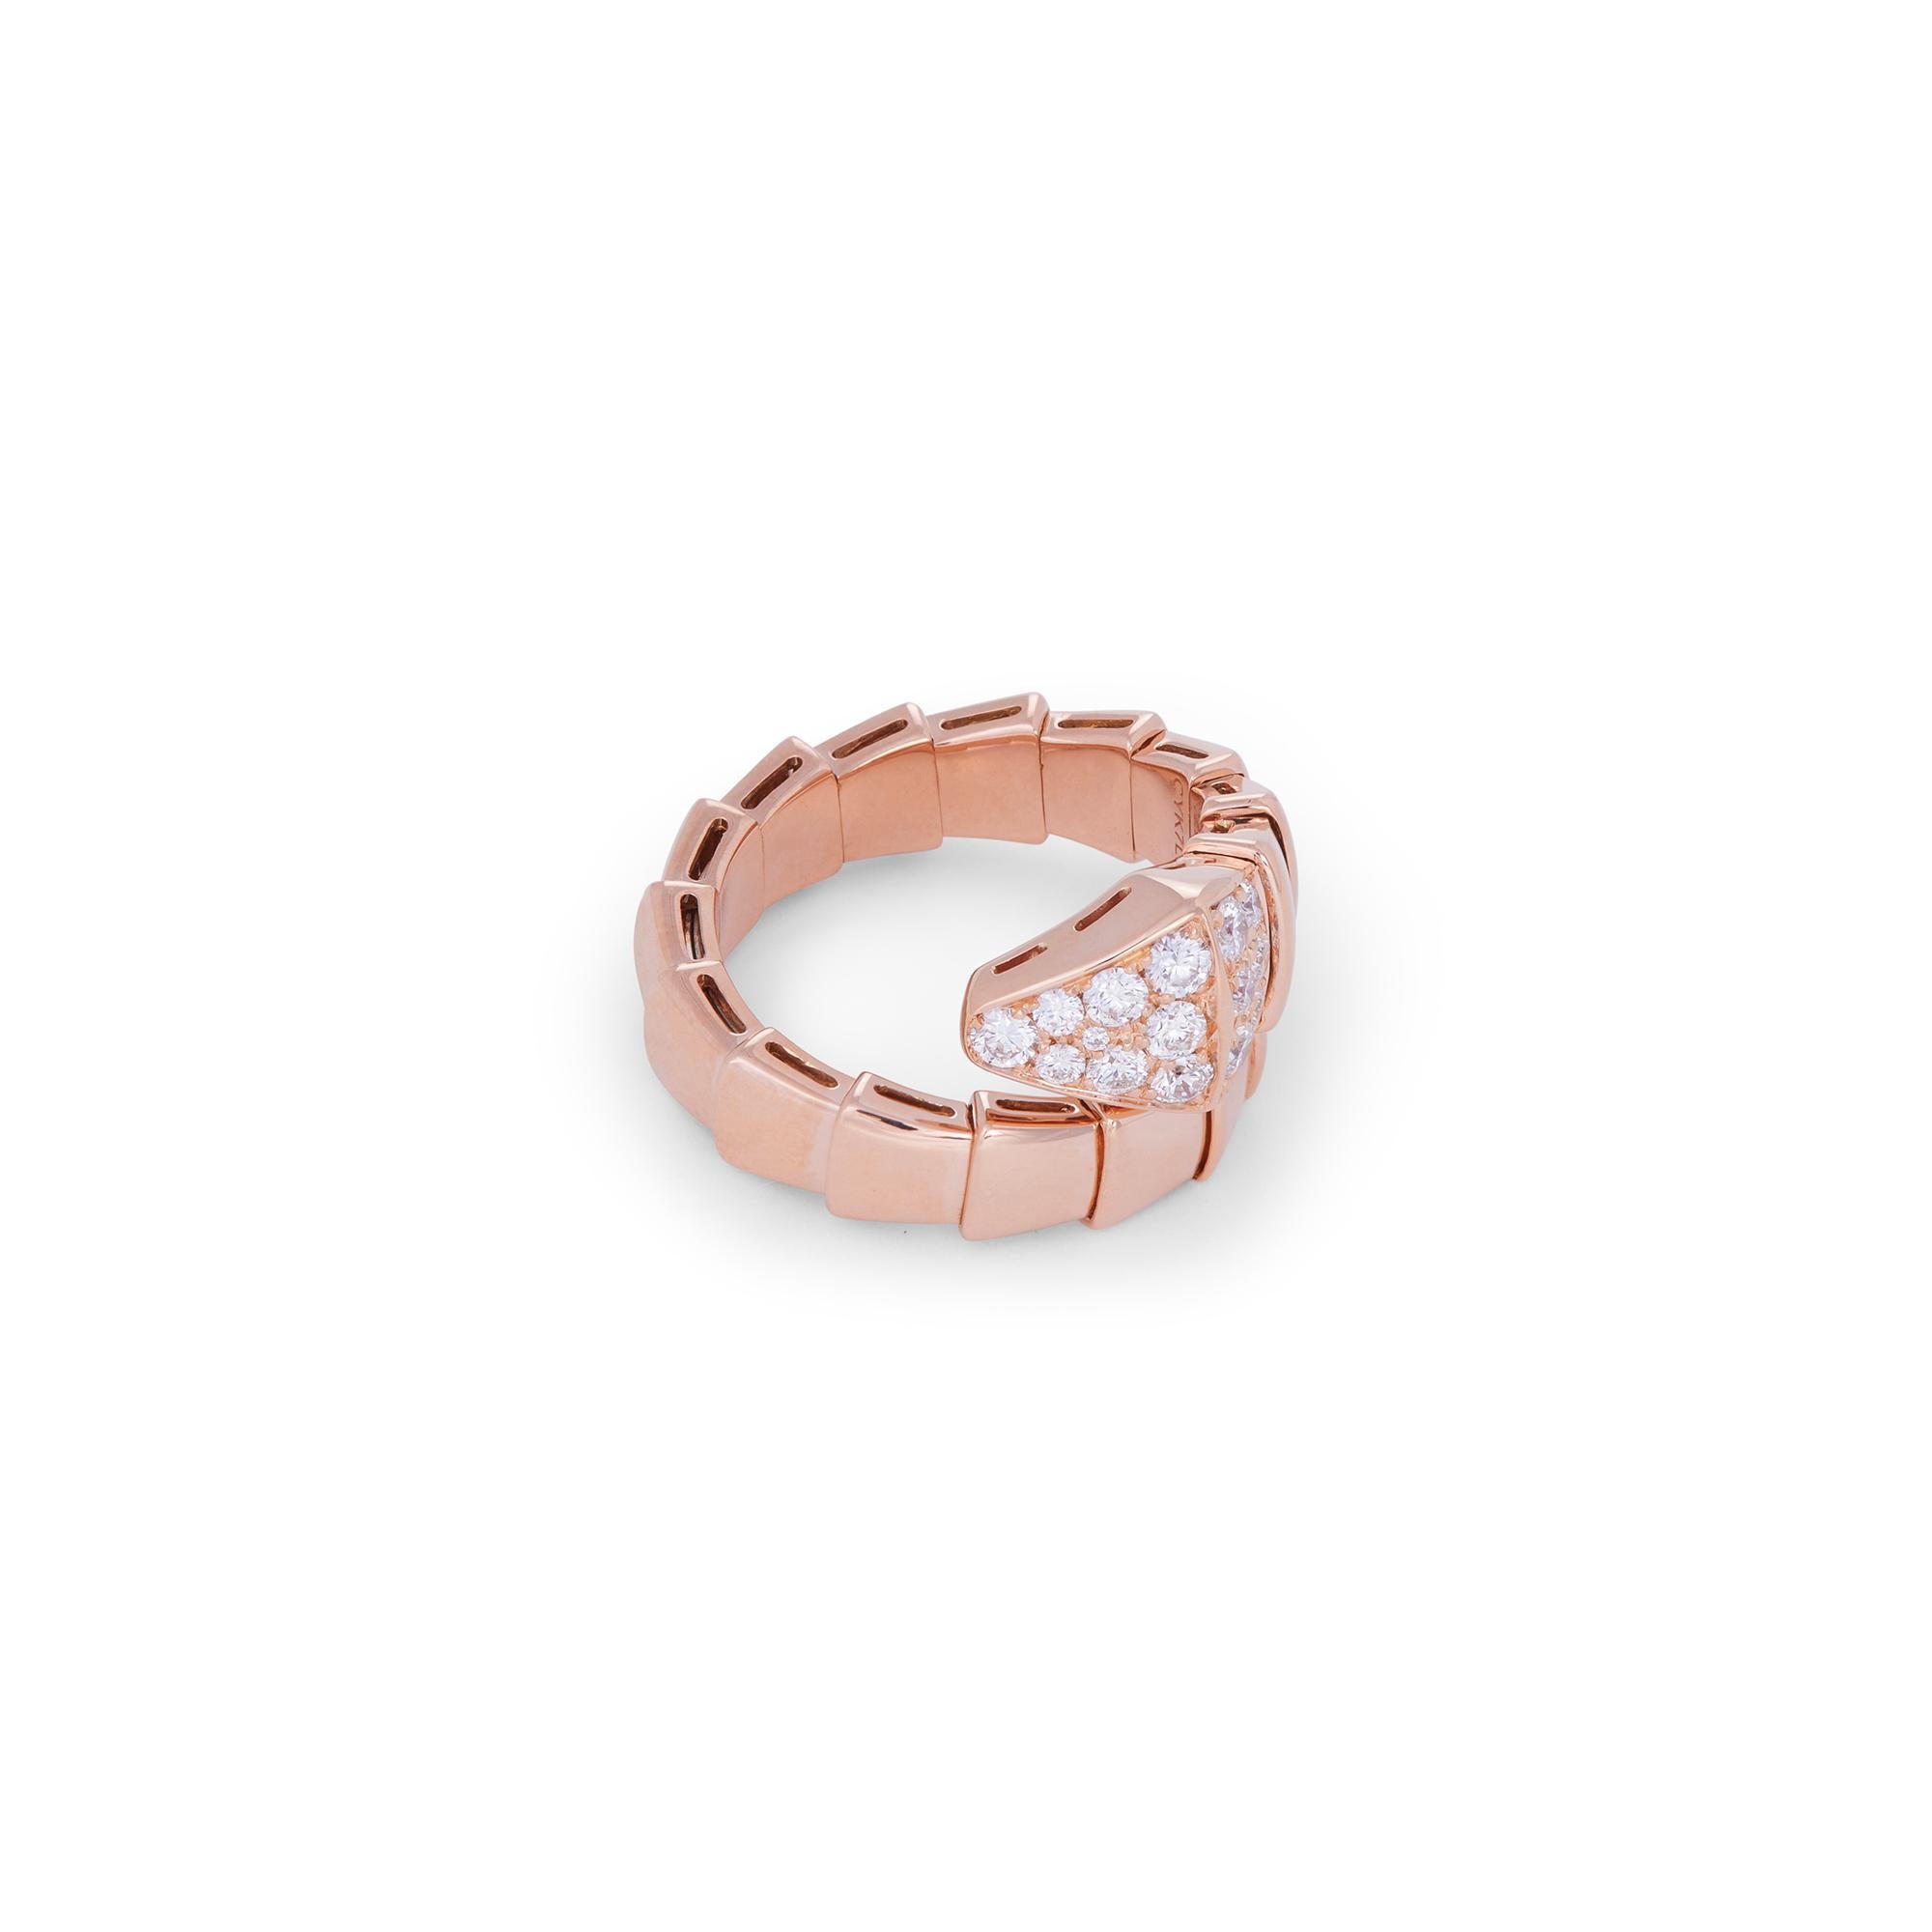 Authentic Bvlgari Serpenti Viper ring crafted in 18 karat rose gold. The serpentine design coils around the finger and features pavé set diamonds of an estimated 0.53 total carats on the head. Size M, will fit US finger sizes 5 3/4- 6 1/2 (EU